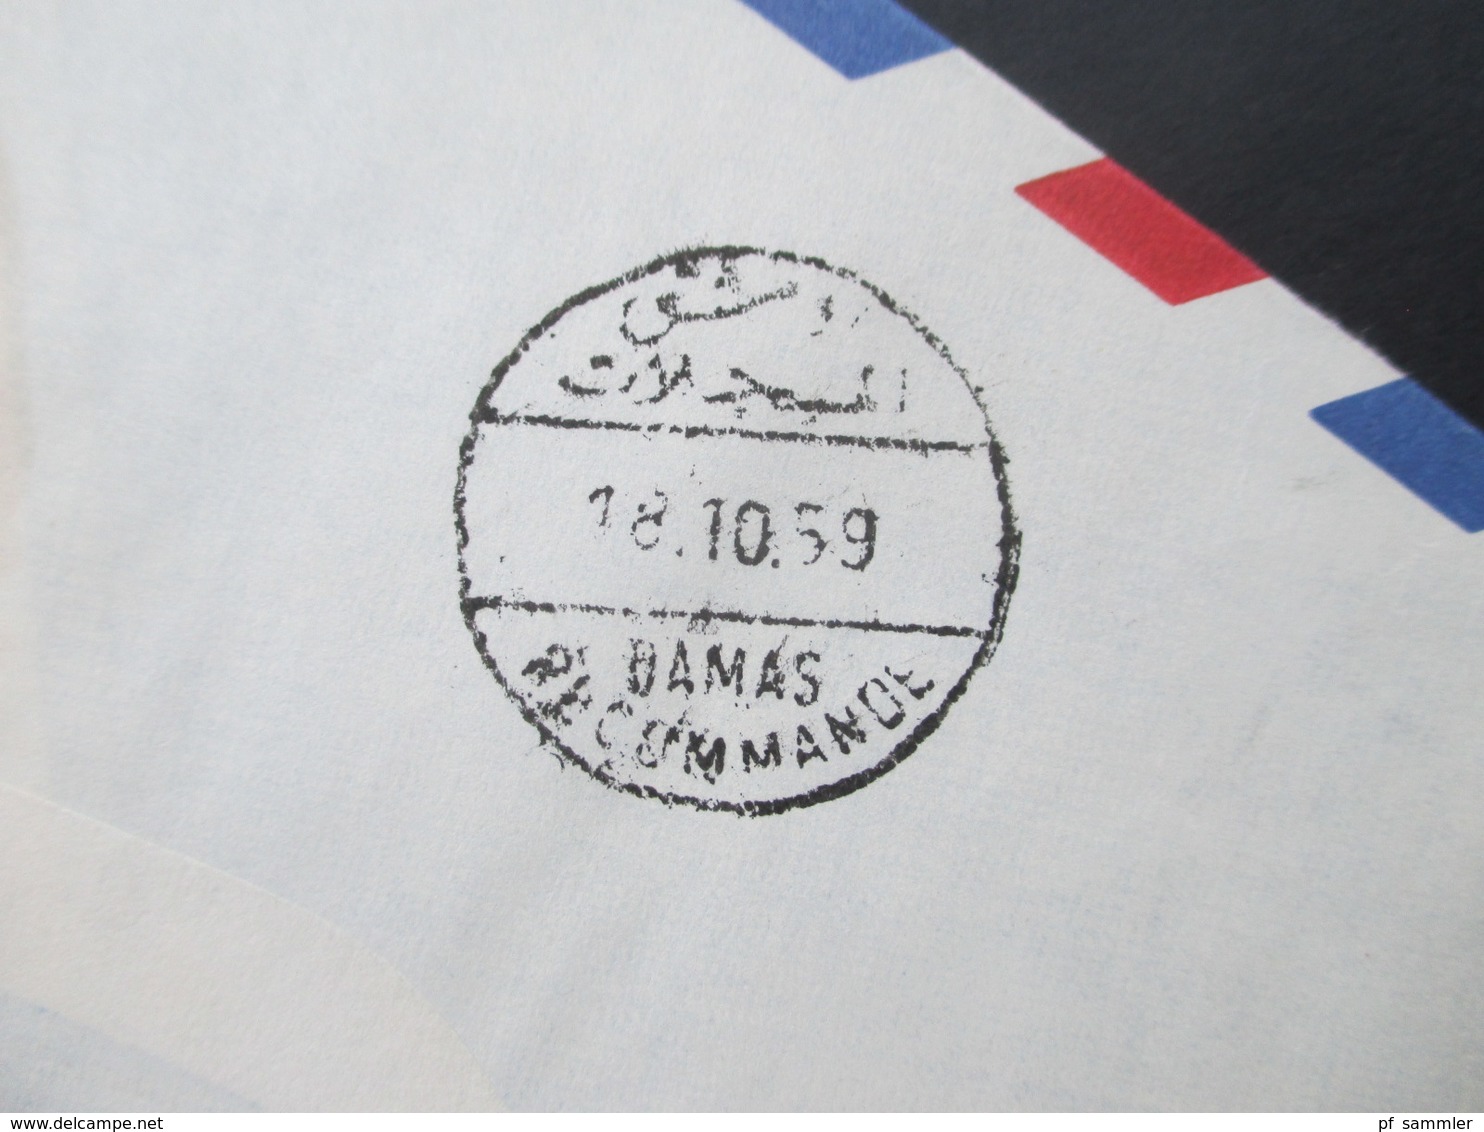 Syrien / UAR 1959 Luftpost / Air Mail Registered letter! The British Bank of the Middle East Aleppo (U.A.R.)